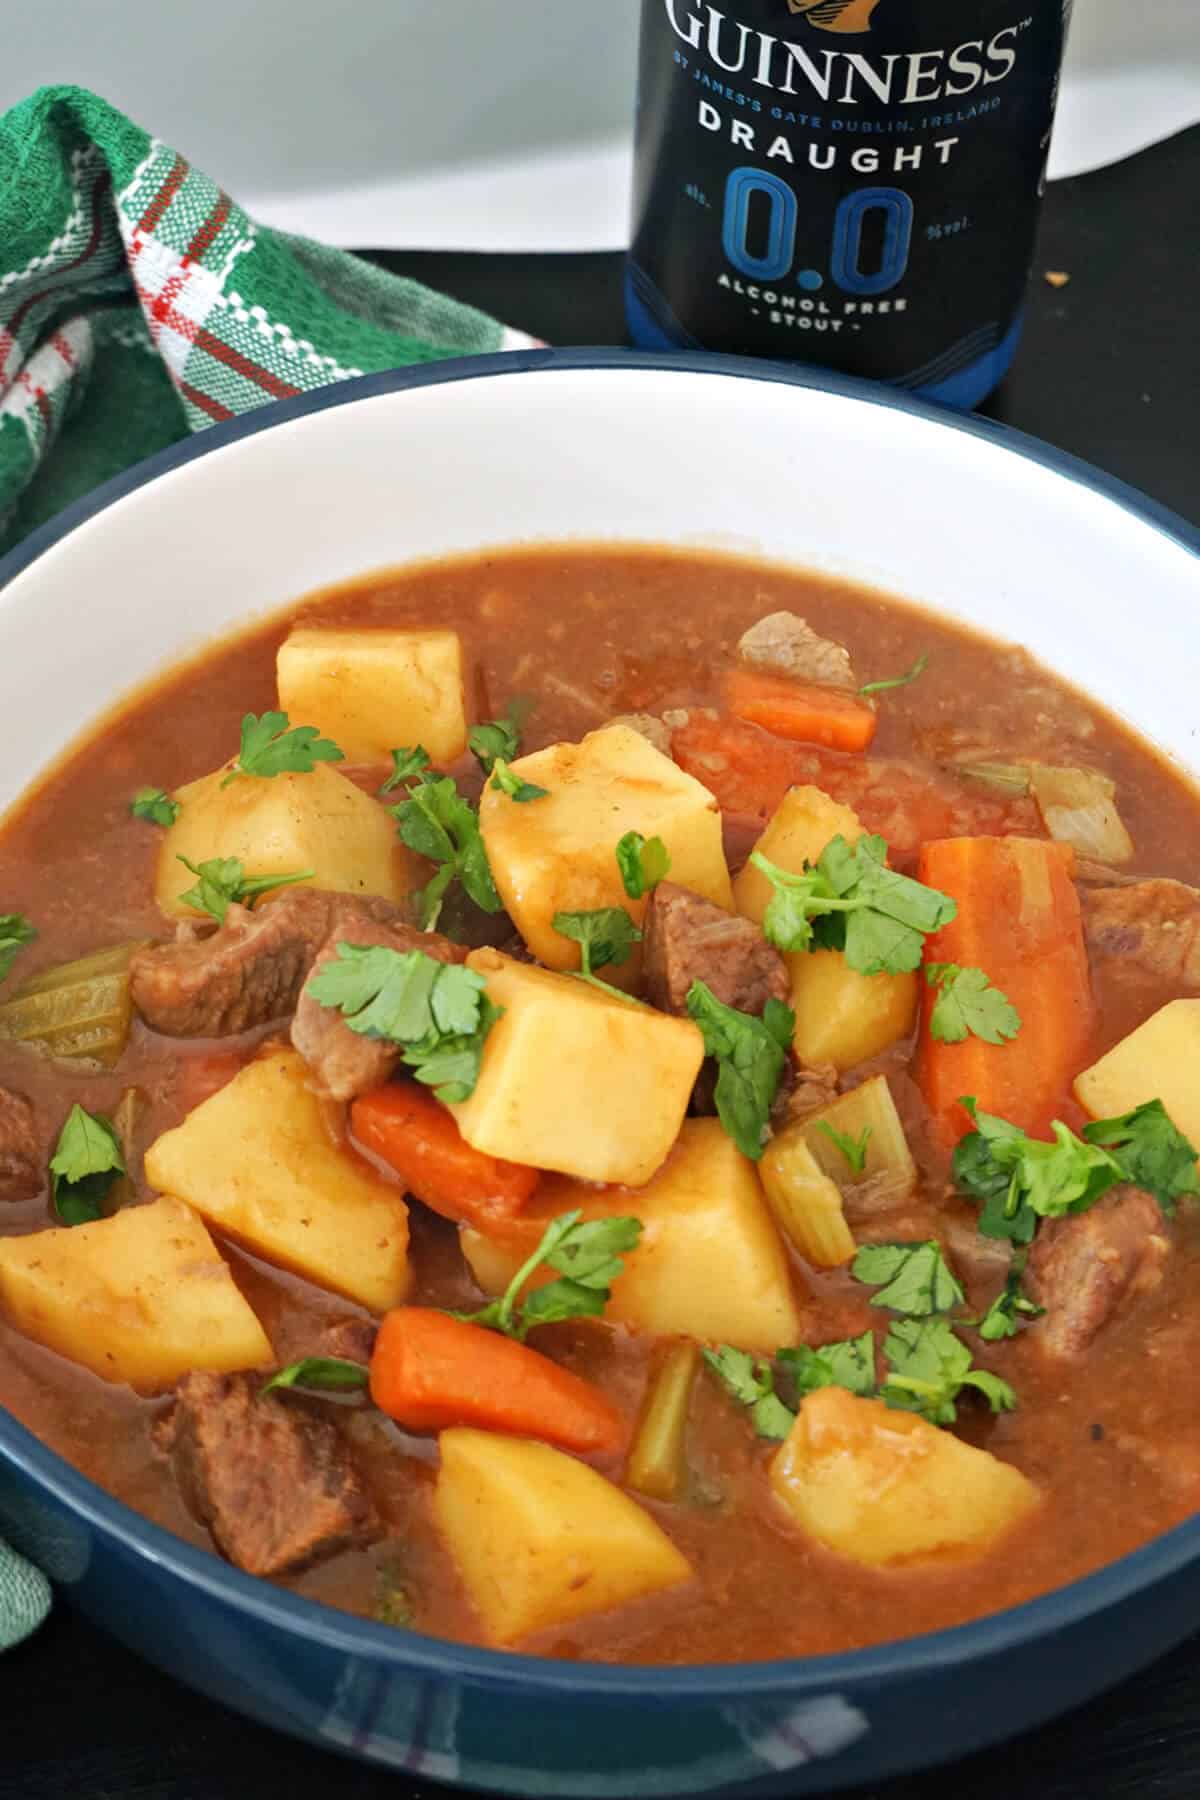 A bowl of beef stew with a can of Guinness in the background.